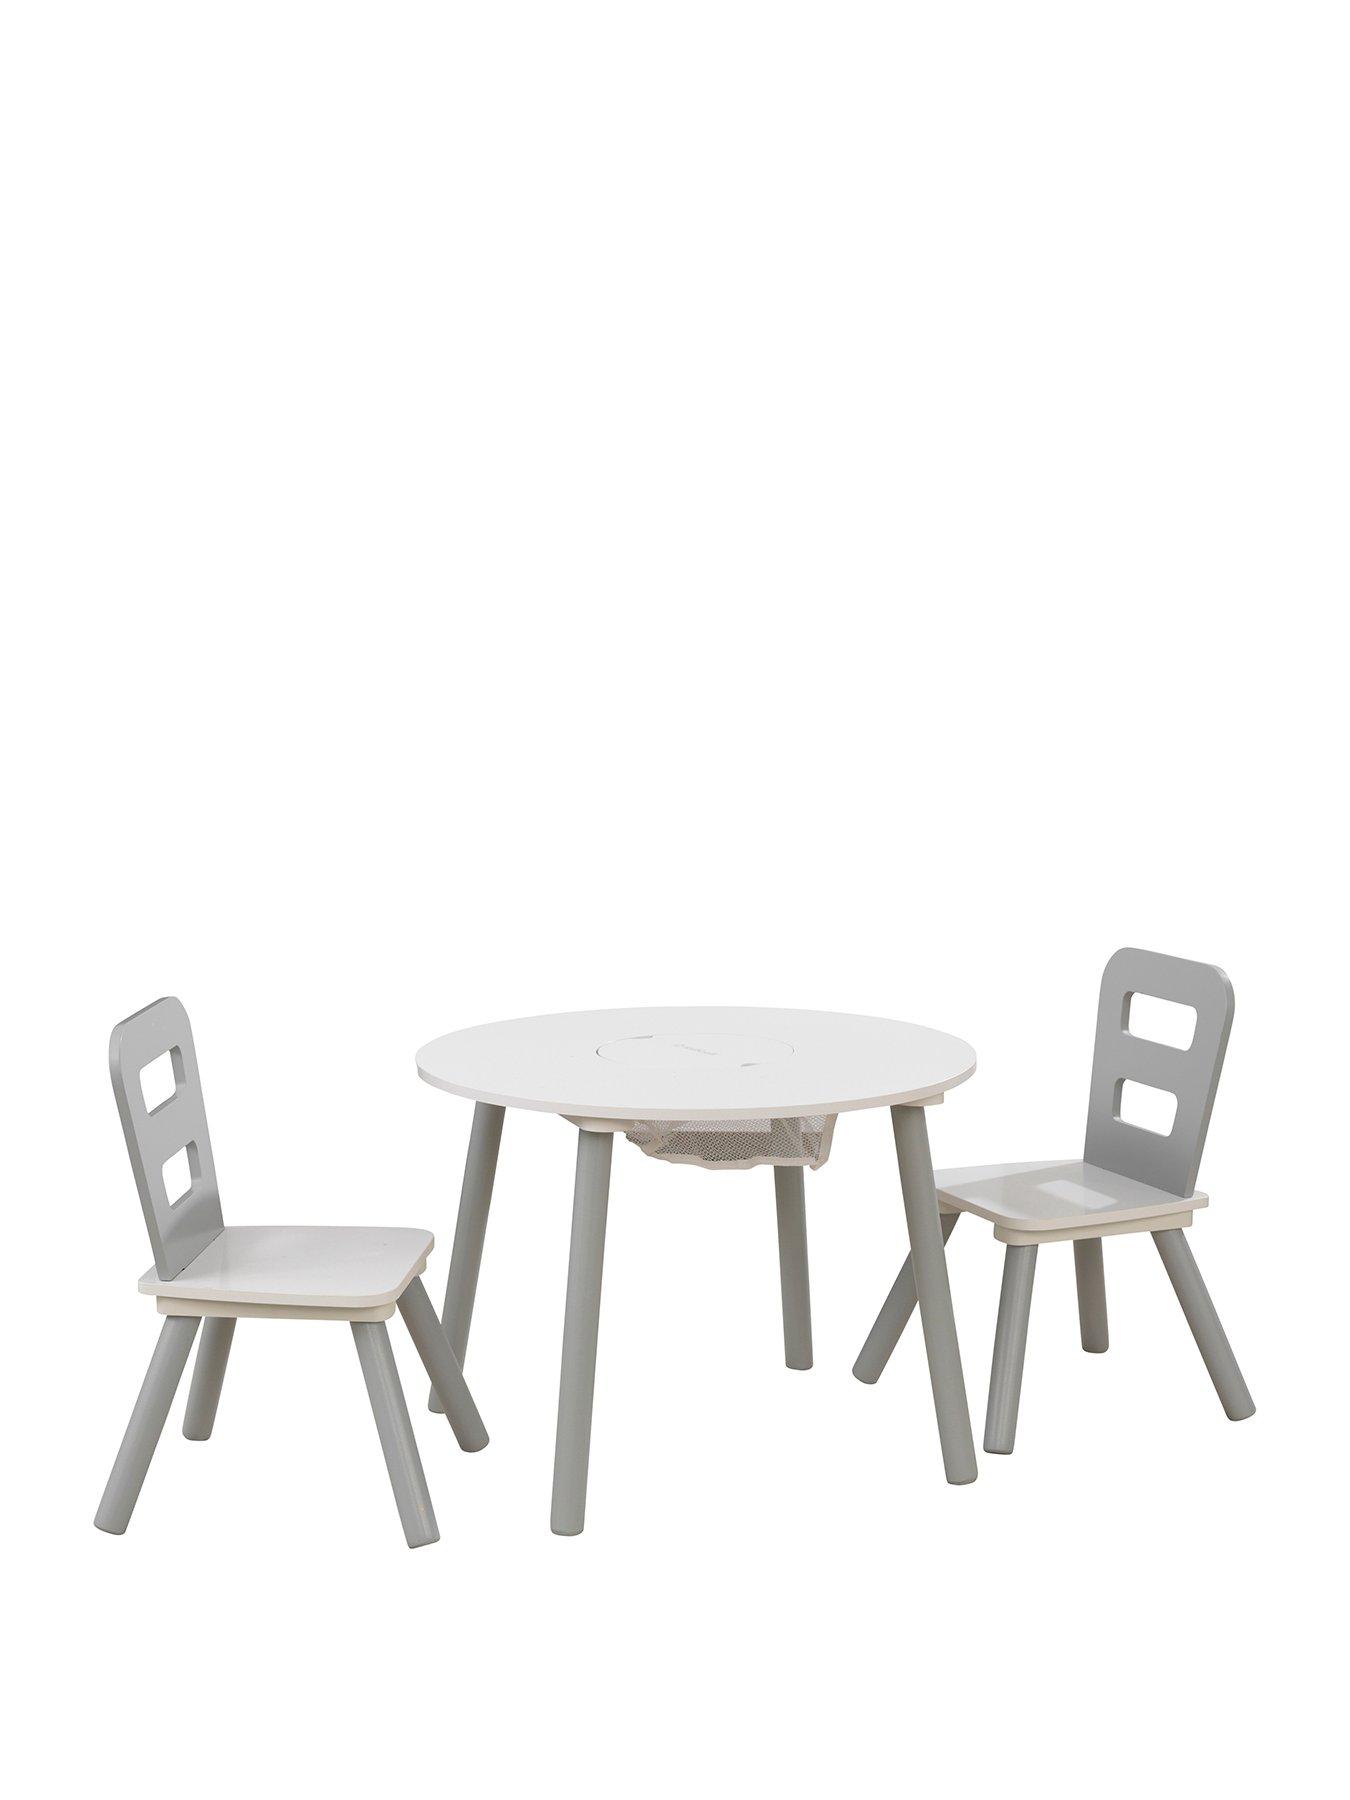 Kidkraft Round Storage Table And Set Of 2 Chairs - Grey/White